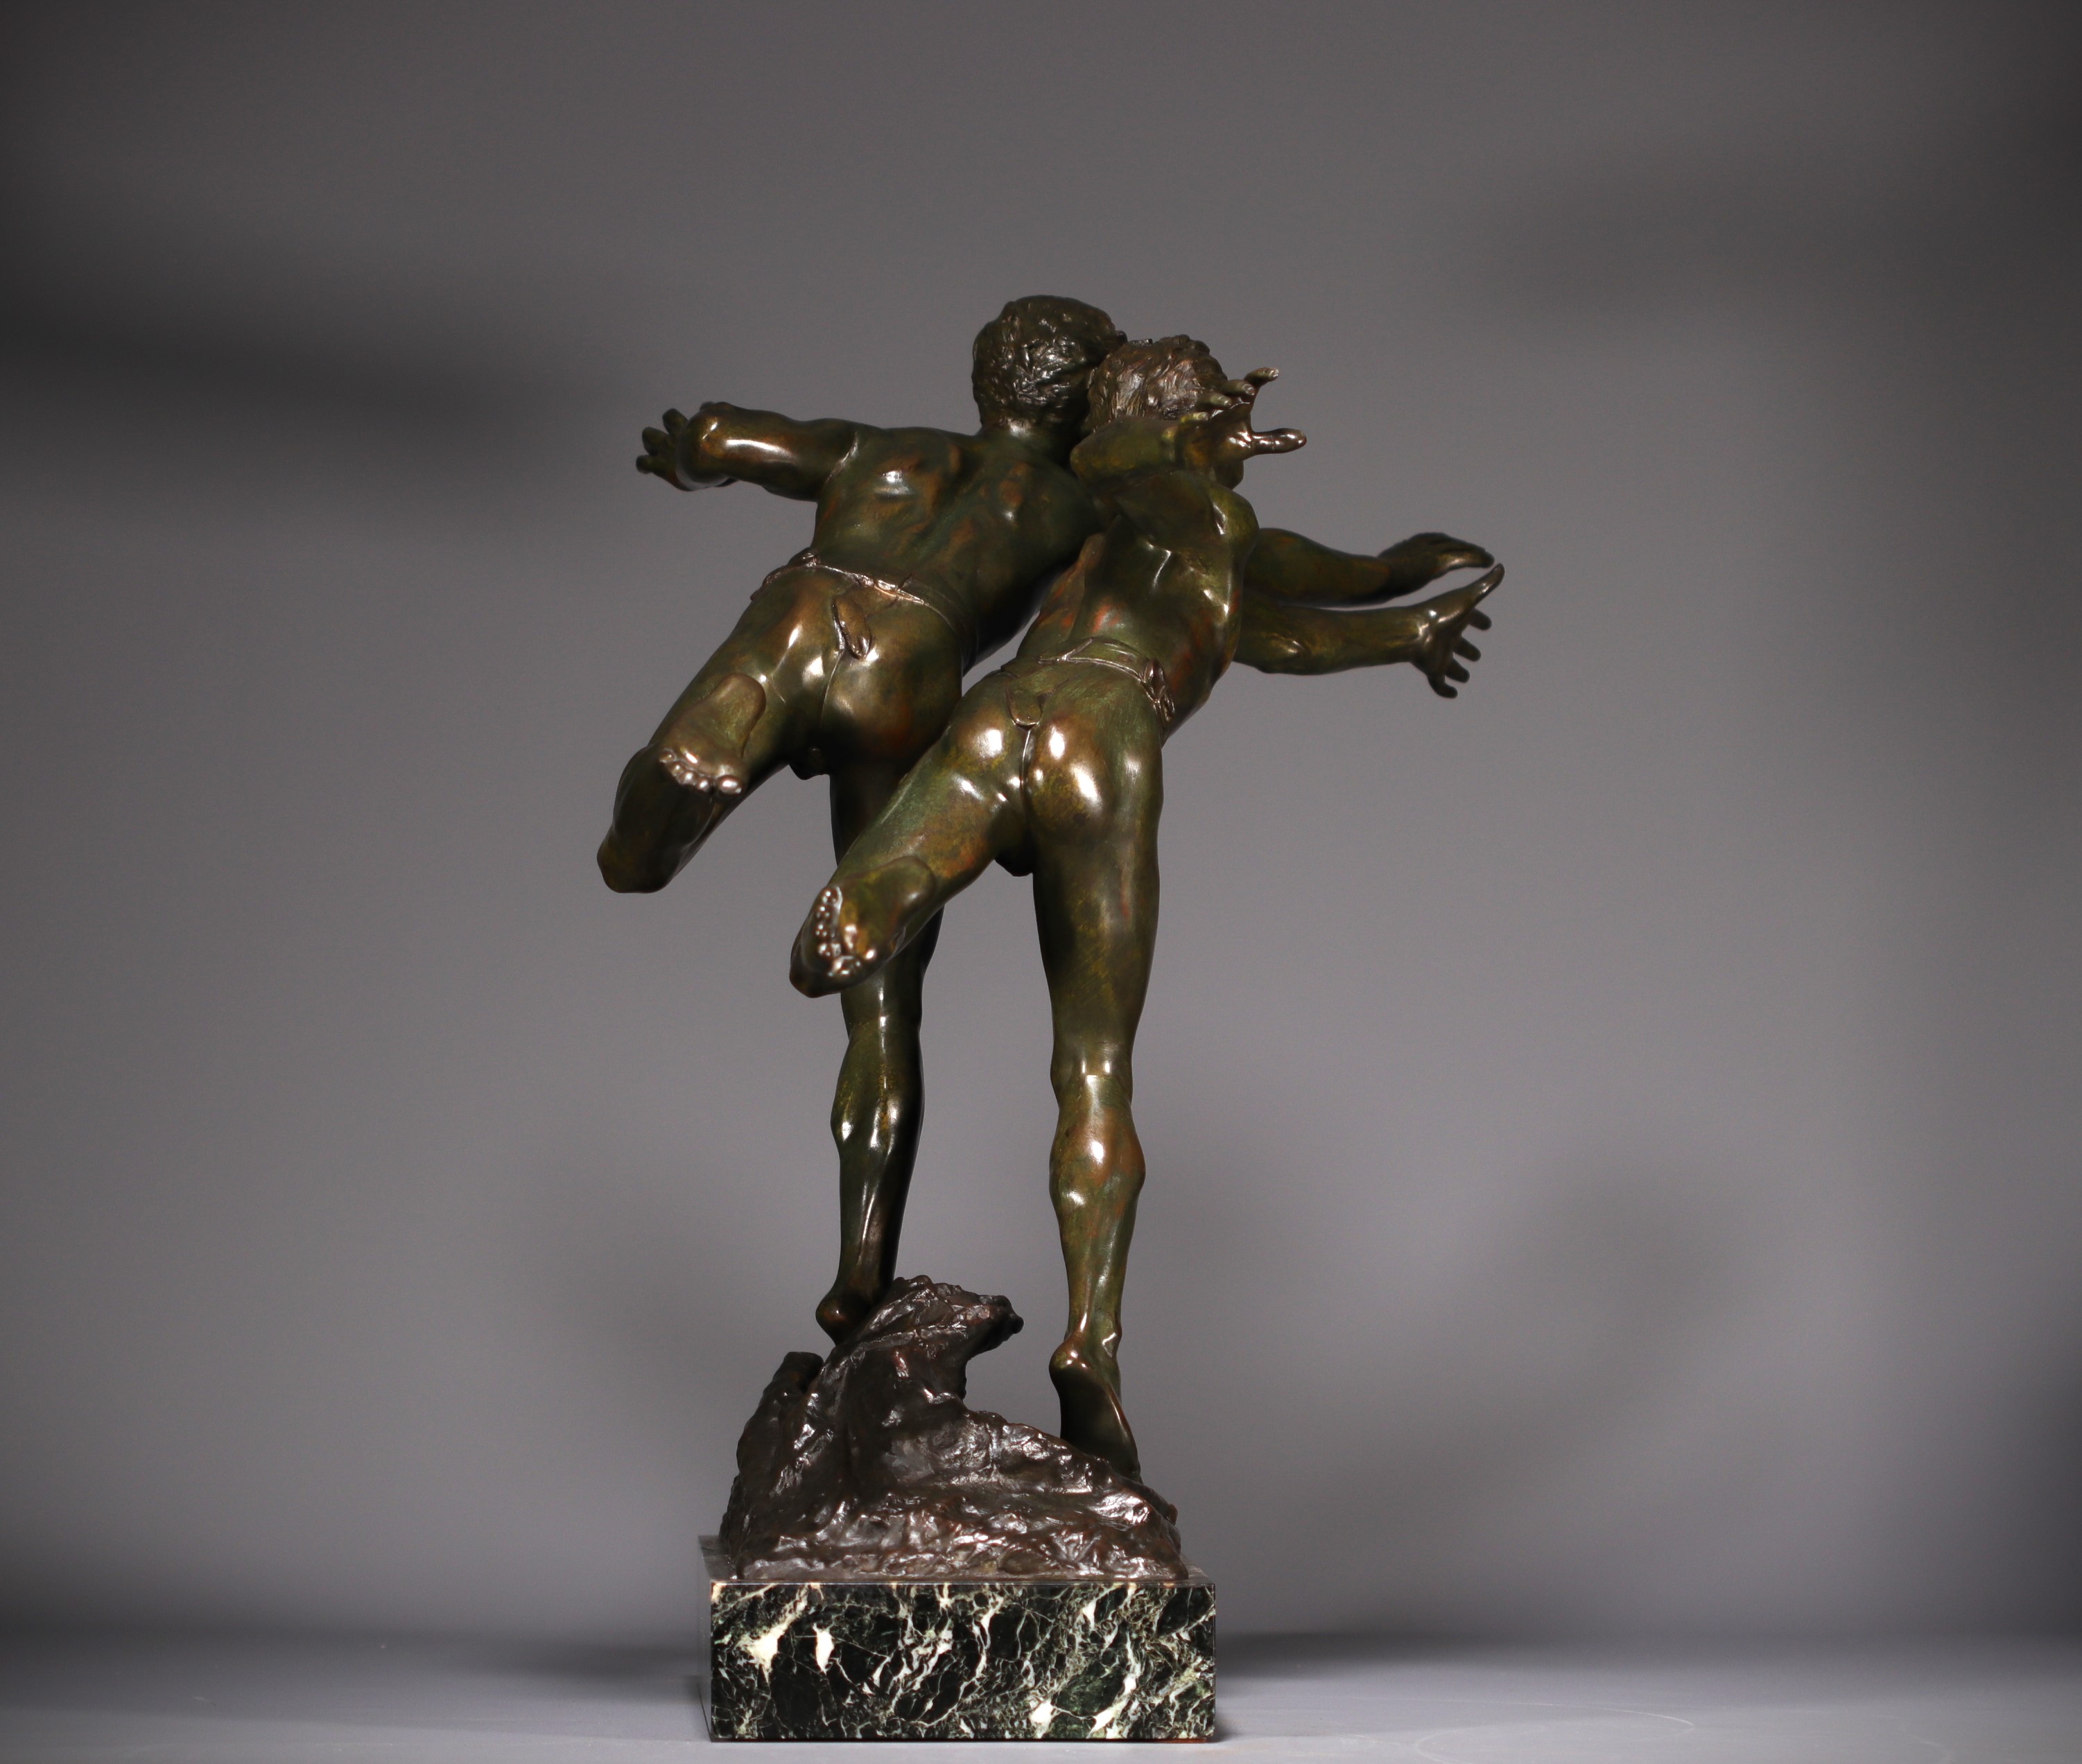 Edouard DROUOT (1859-1945) "La course" Bronze with green and brown shaded patina, on a marble base,  - Image 4 of 8